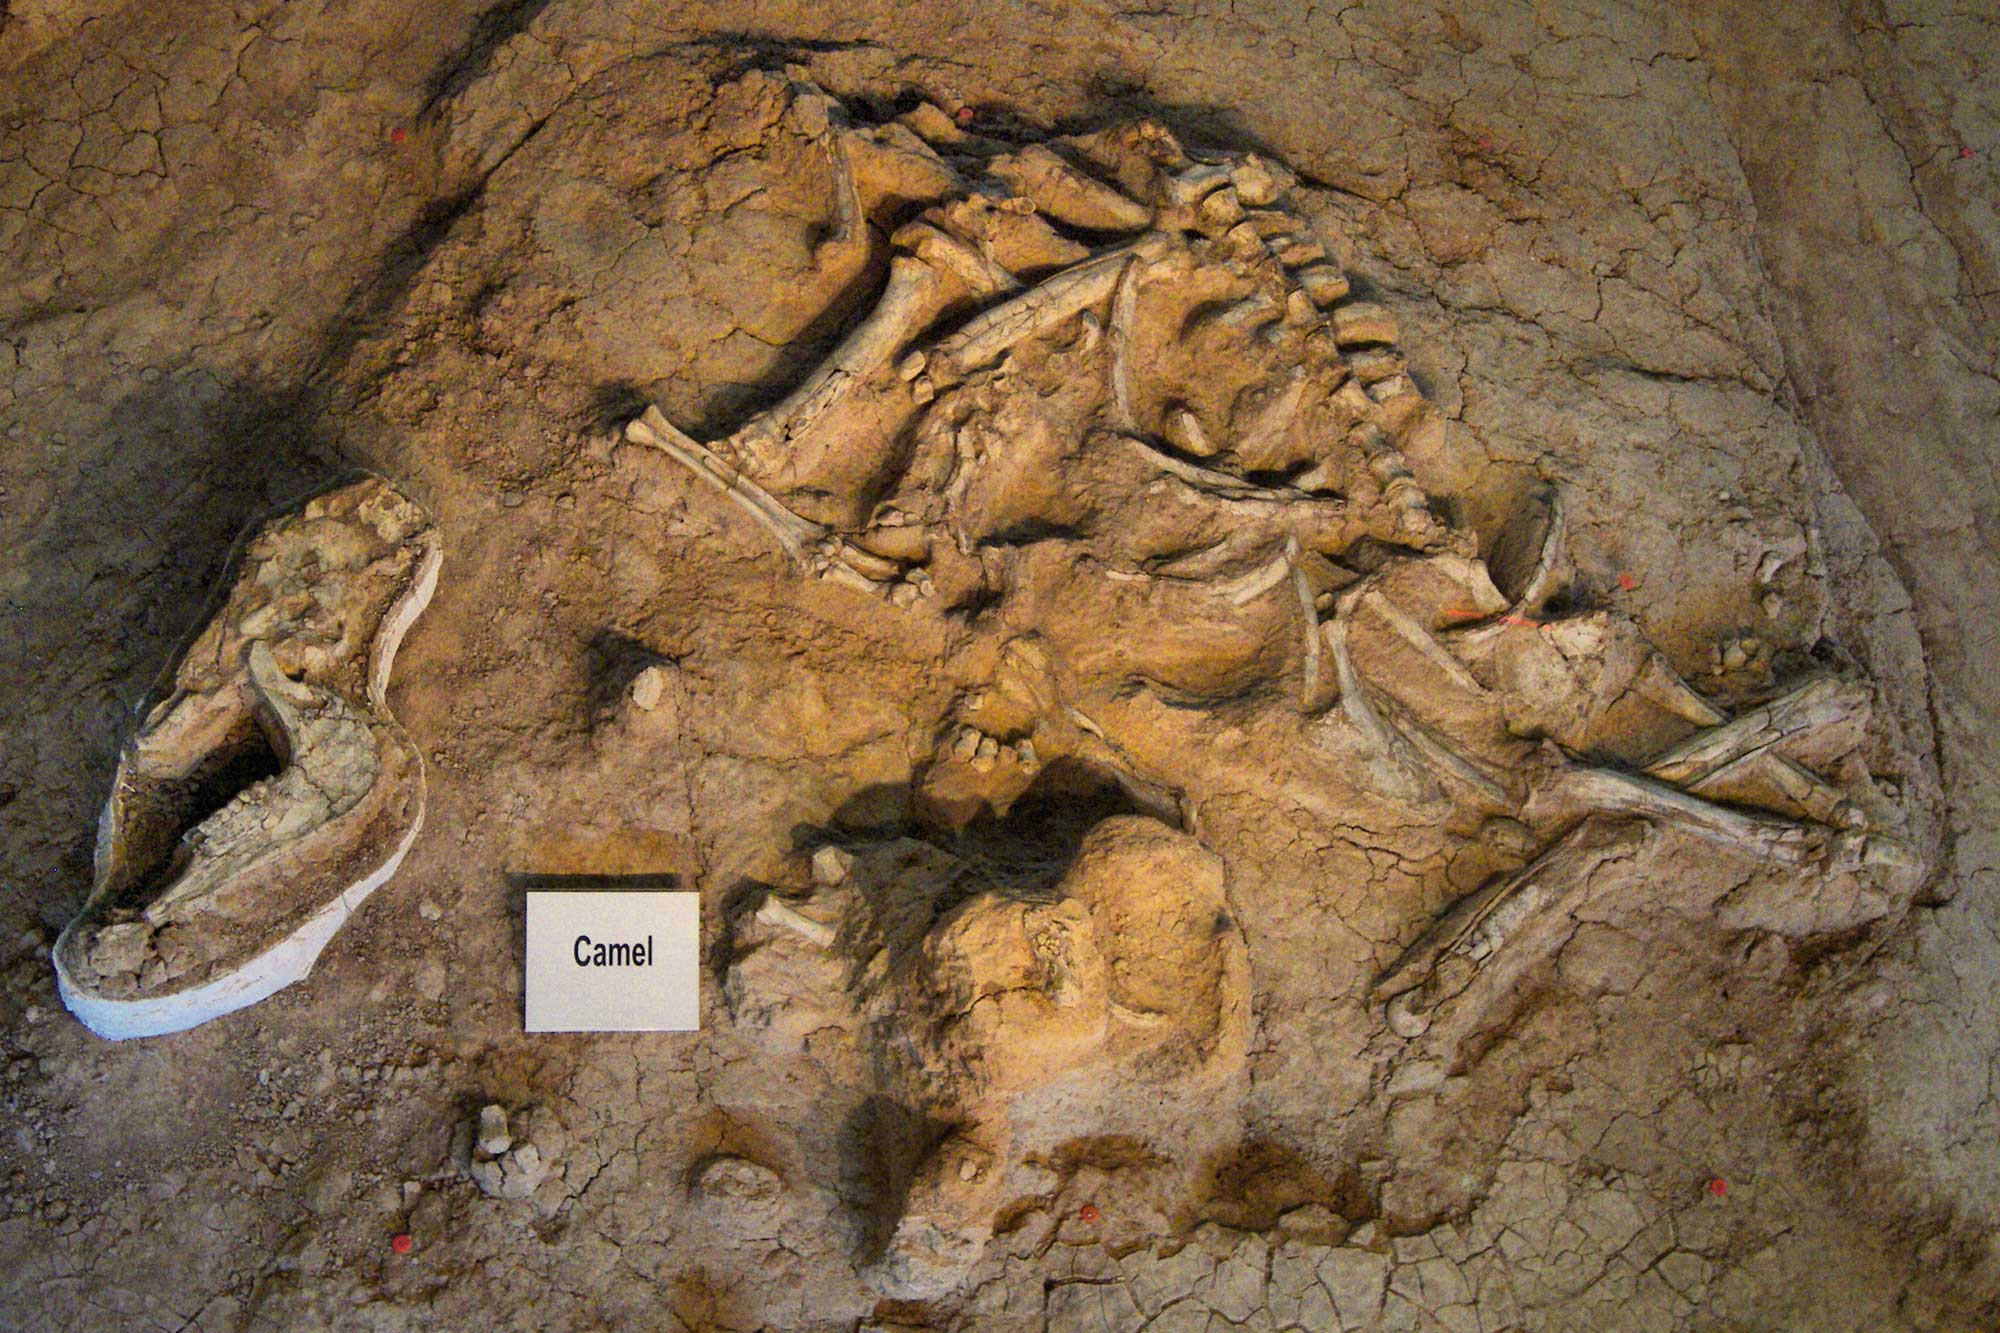 Photo of a partially excavated camel skeleton at Waco Mammoth National Monument.